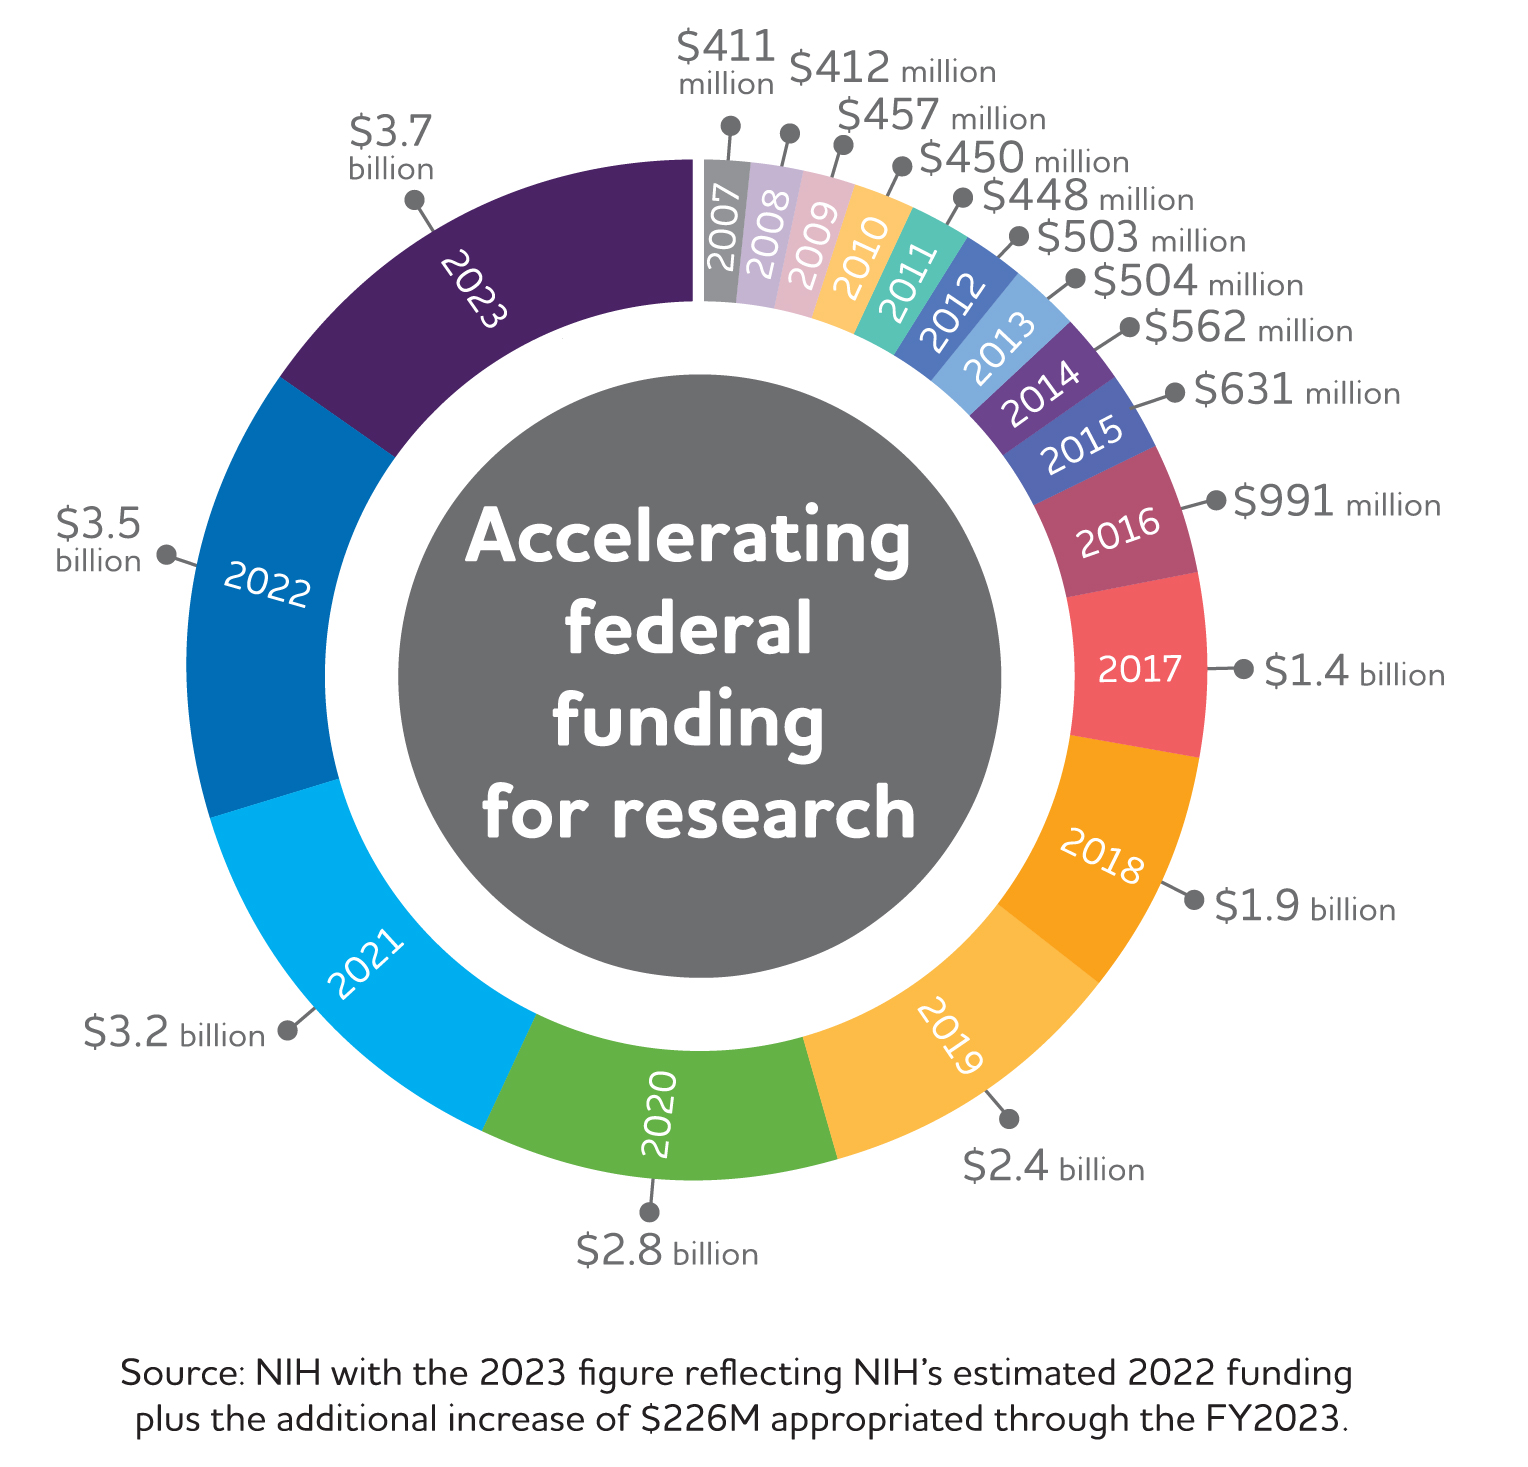 Since 2007, funding has grown from $11 million to over $3.4 billion for FY 2022.